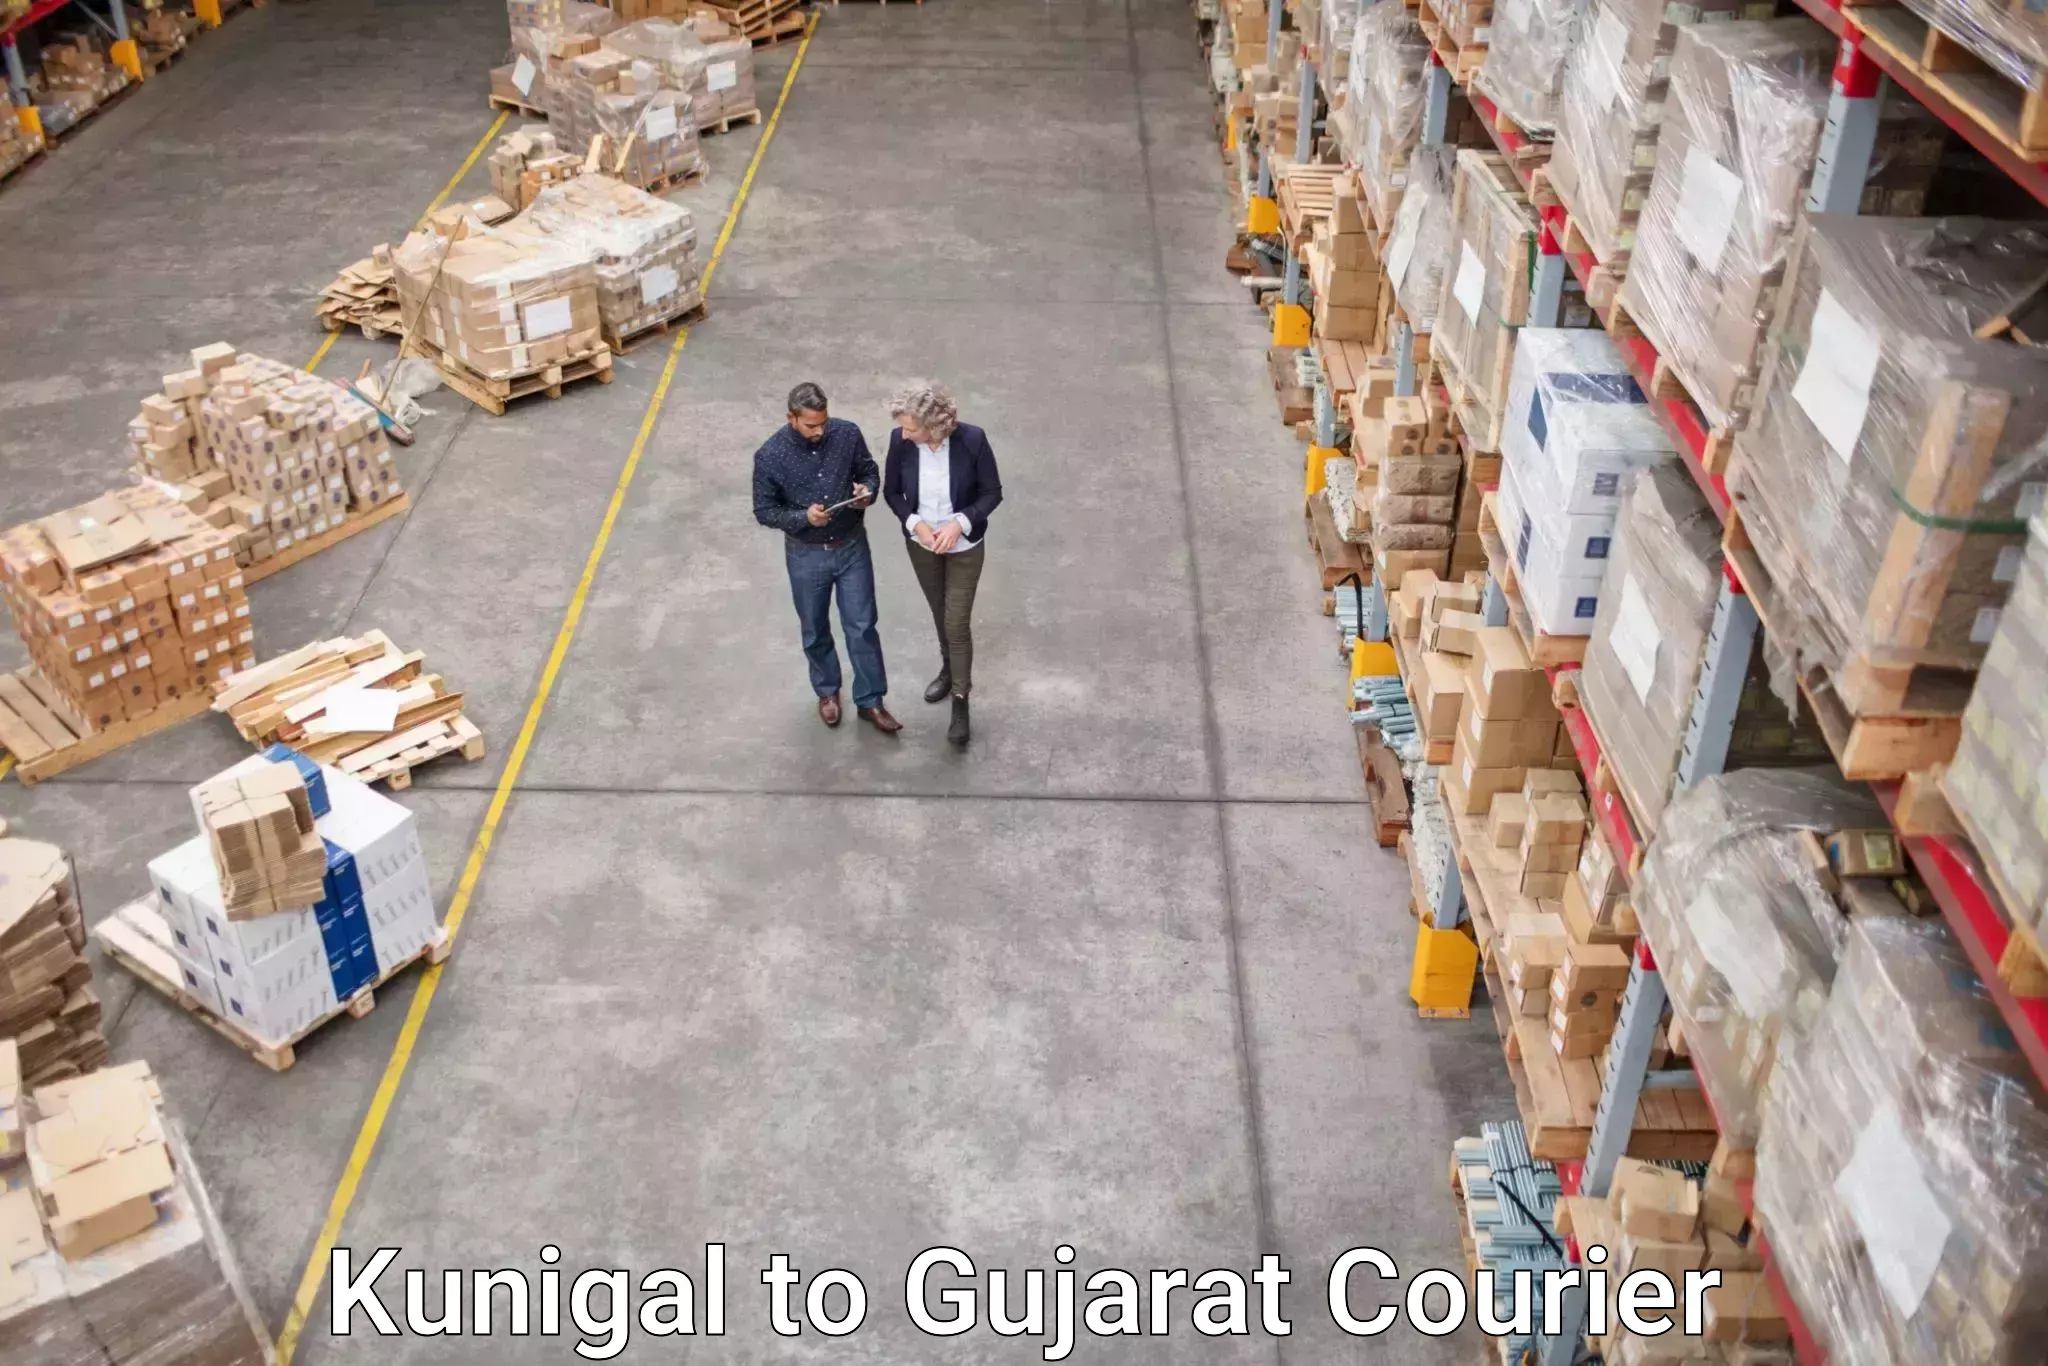 Express delivery network Kunigal to Sanand